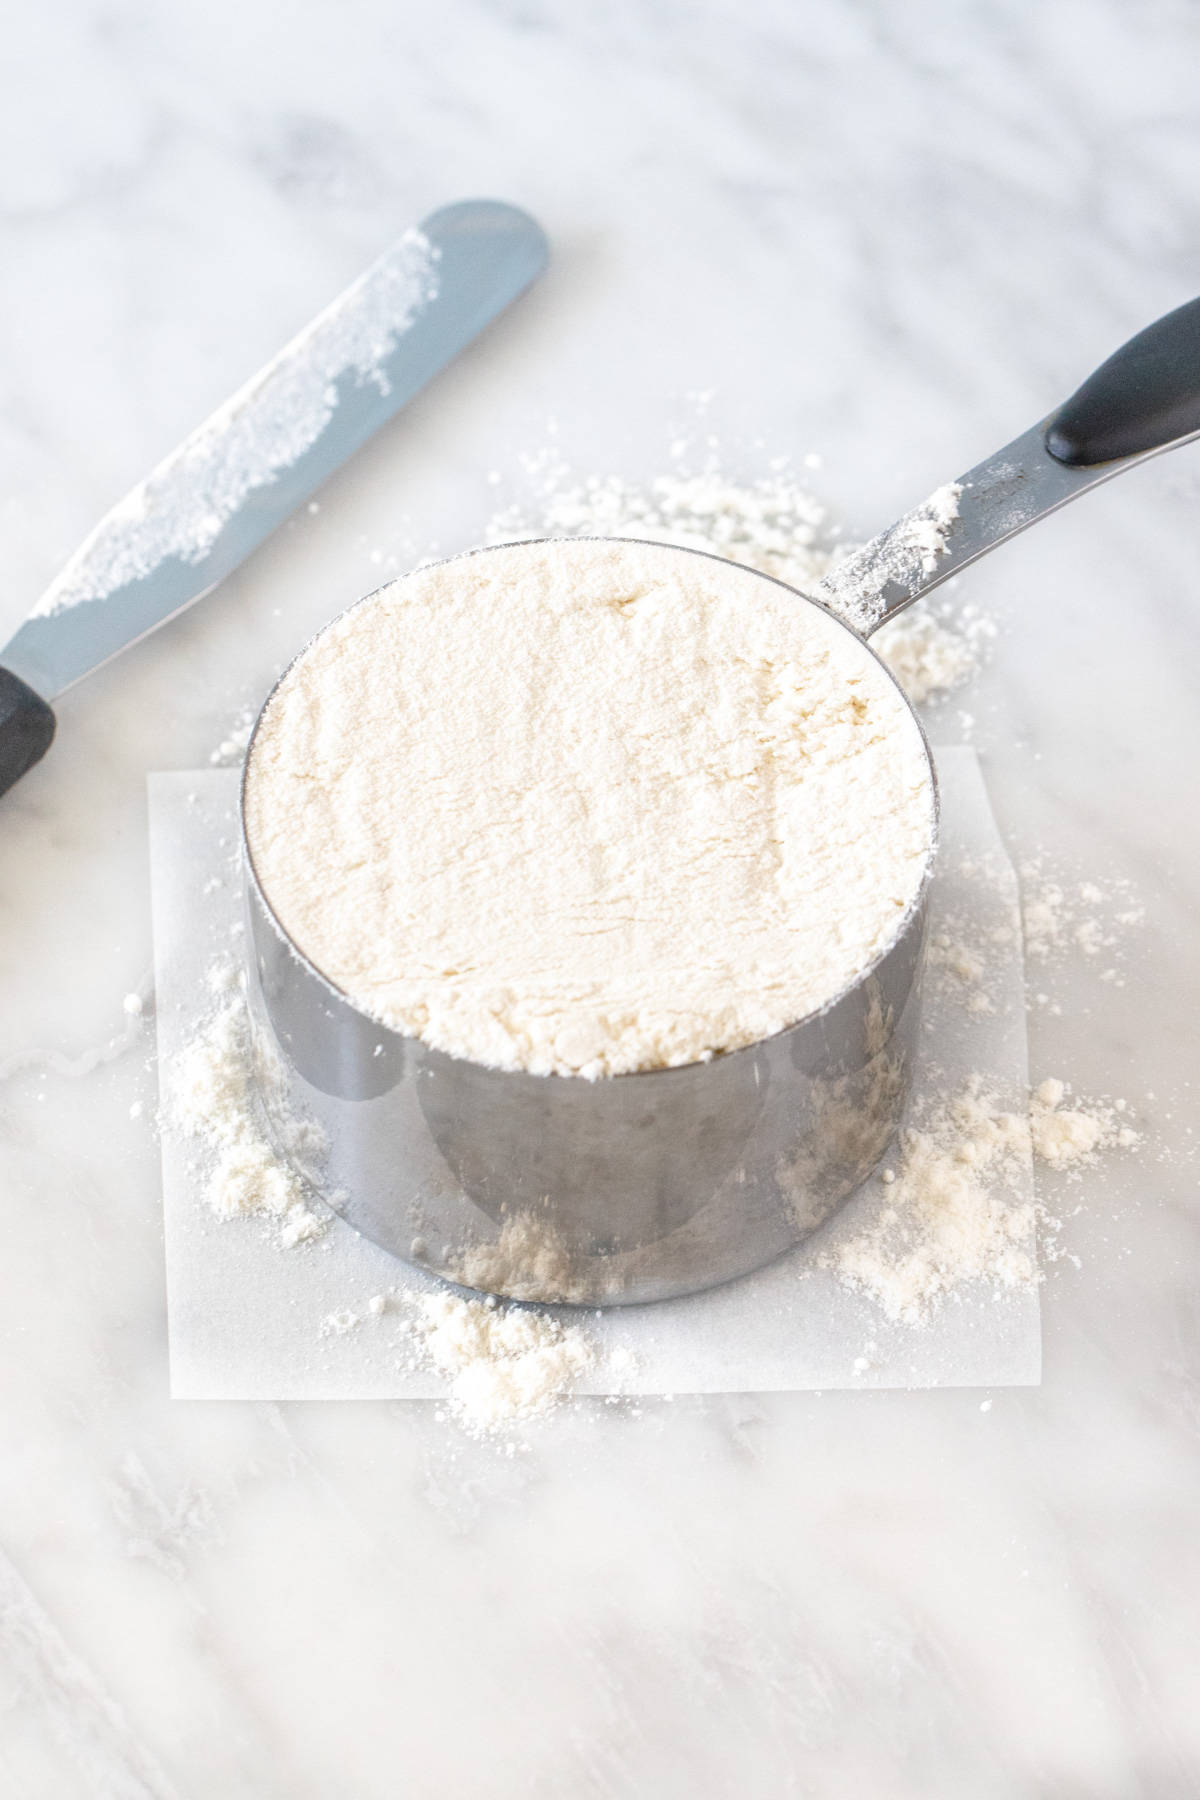 https://www.justsotasty.com/wp-content/uploads/2024/01/How-to-Measure-Flour.jpg